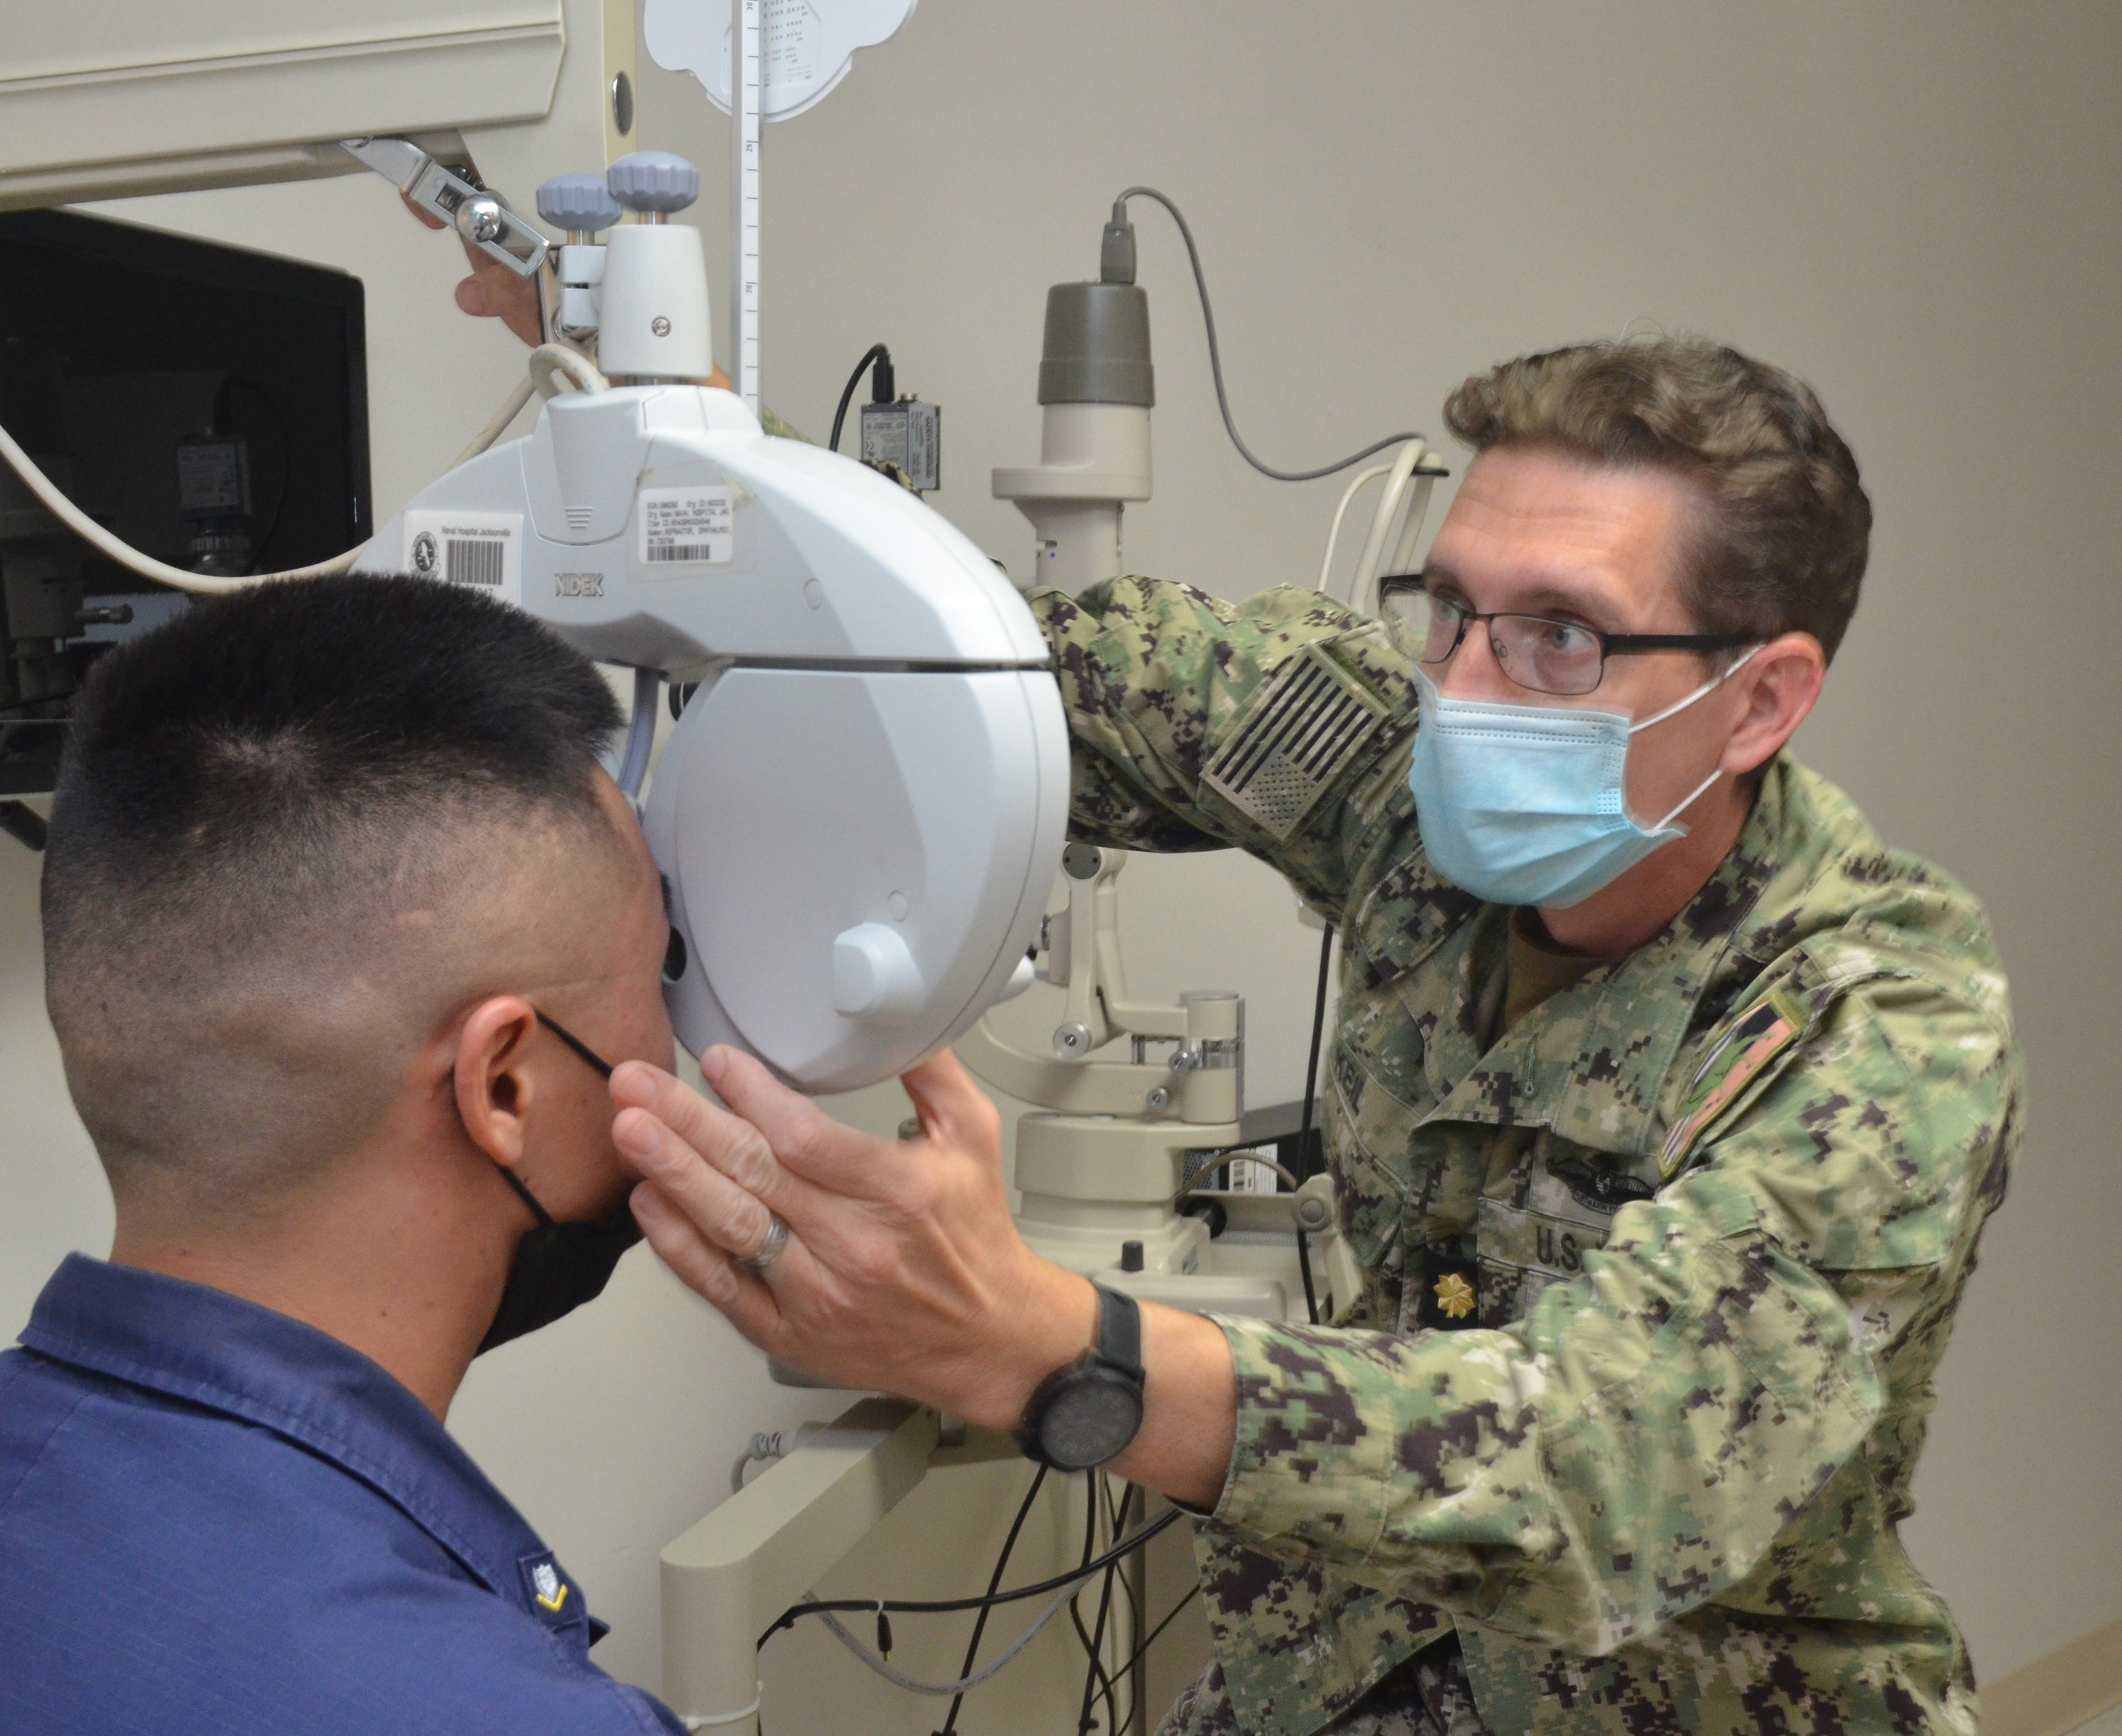 KEY WEST, Fla. (Sept. 14, 2021) - Lt. Cmdr. Joshua Keil, an optometrist at Naval Branch Health Clinic Key West, performs an eye exam on U.S. Coast Guard Petty Officer 3rd Class Thomas Li. Keil is a native of Palmer, Alaska and holds a doctor of optometry from University of Missouri. He says, "If we find signs of eye disease early, we can treat it before it gets worse. That's why everyone needs eye exams, not just those who wear glasses. It's really about the long-term health of your eyes." (U.S. Navy photo by Deidre Smith, Naval Hospital Jacksonville/Released).